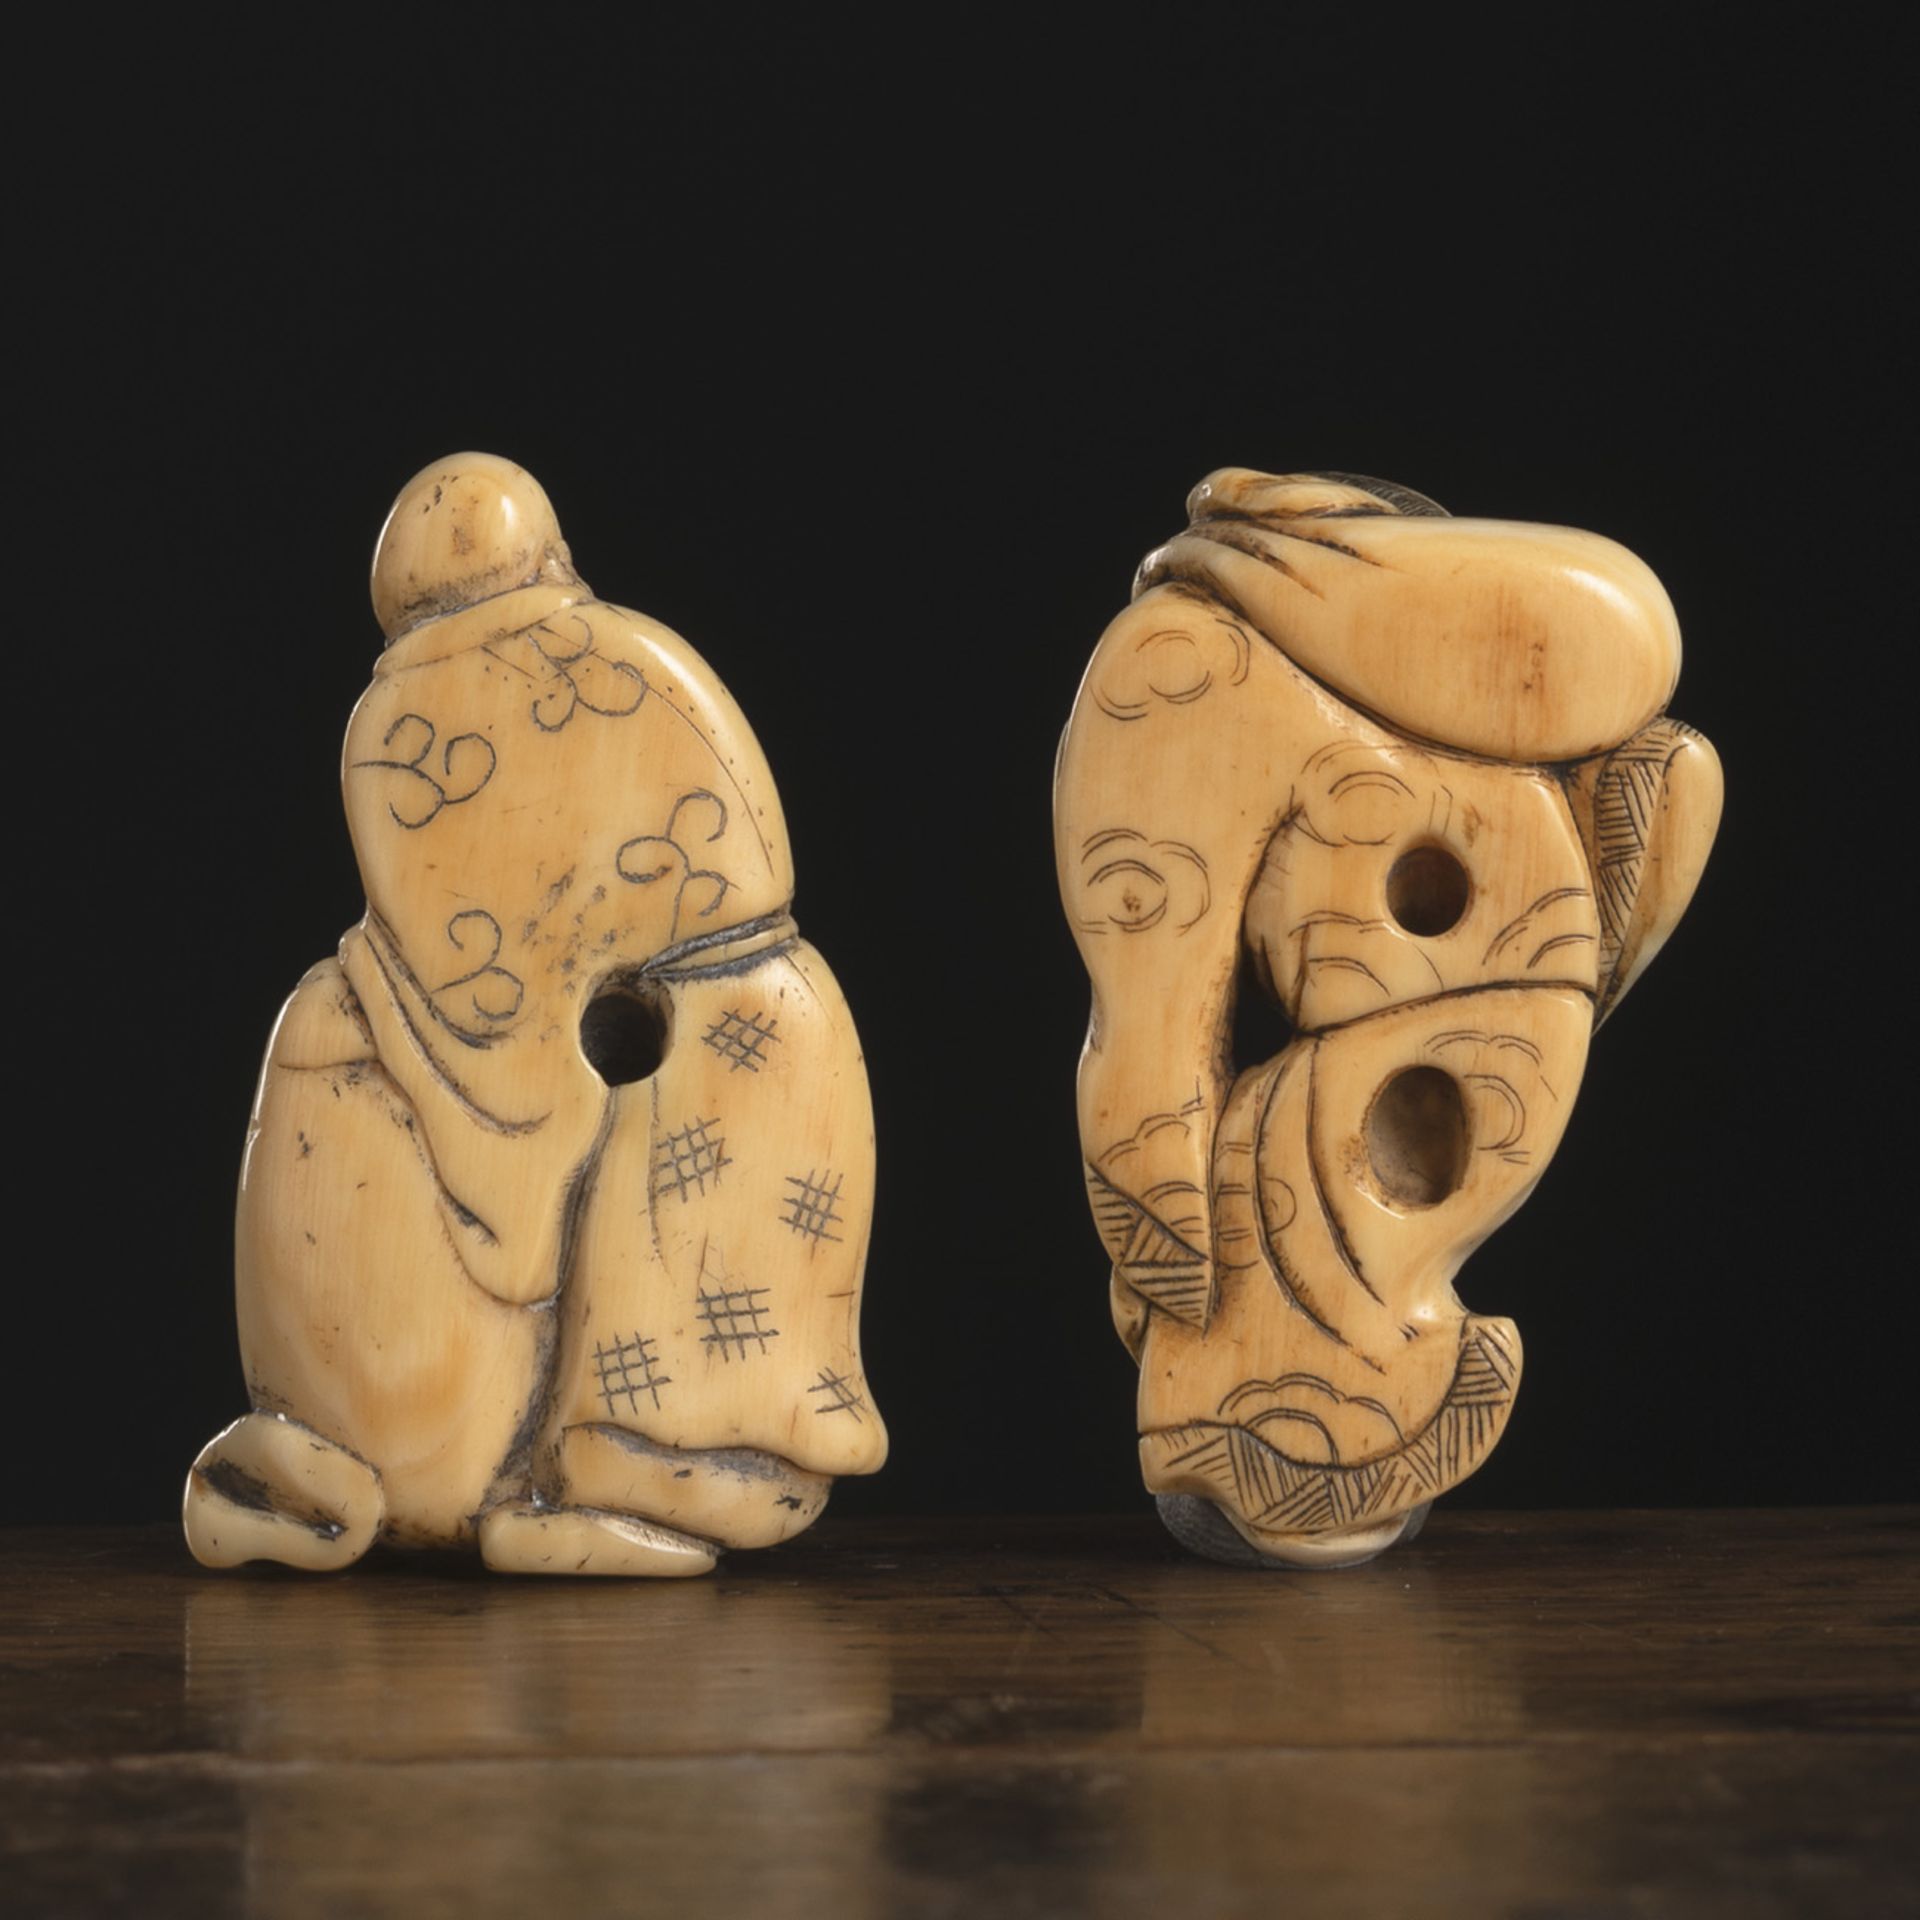 TWO IVORY NETSUKE: SENNIN OR HOTEI WITH A BAG ON HIS SHOULDER AND STANDING CHINESE WITH A LARGE BAG - Image 2 of 5